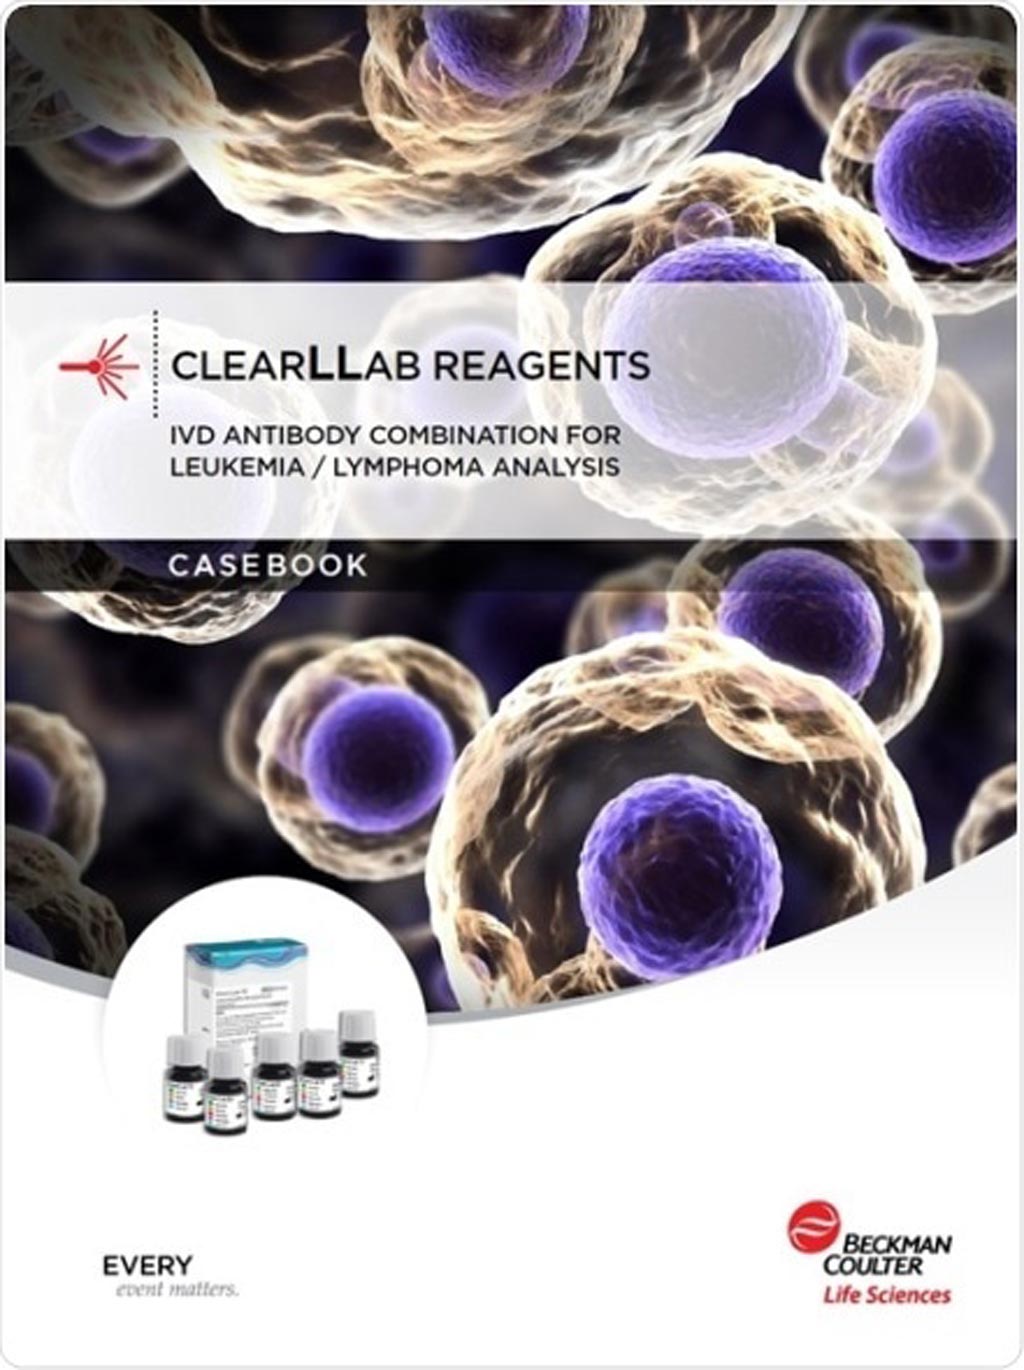 Image: The ClearLLab Casebook 5C (Photo courtesy of Beckman Coulter).